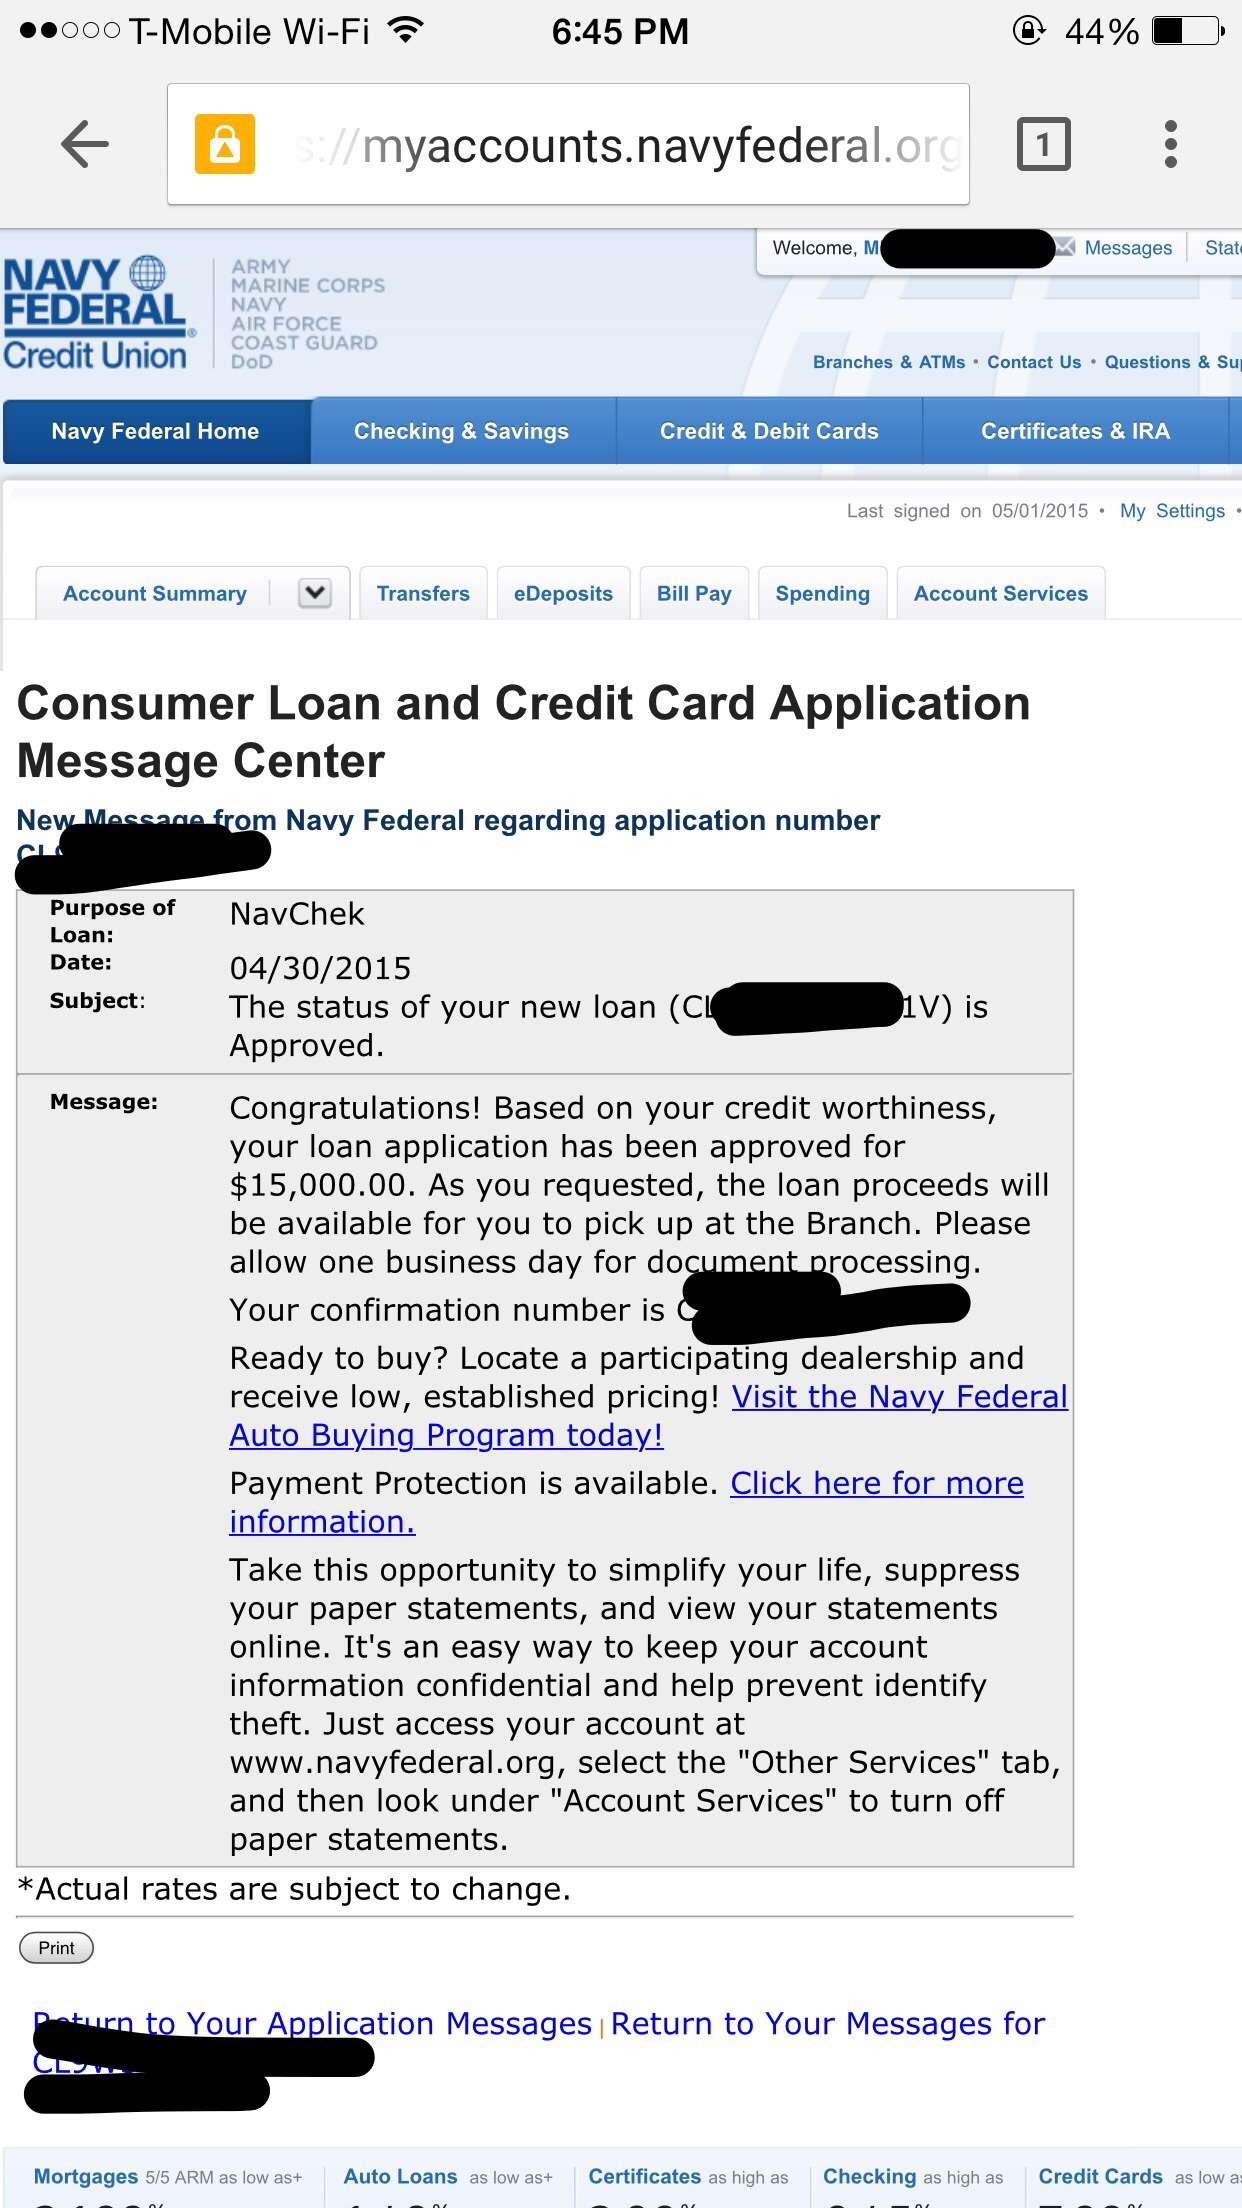 NFCU Navcheck approved!